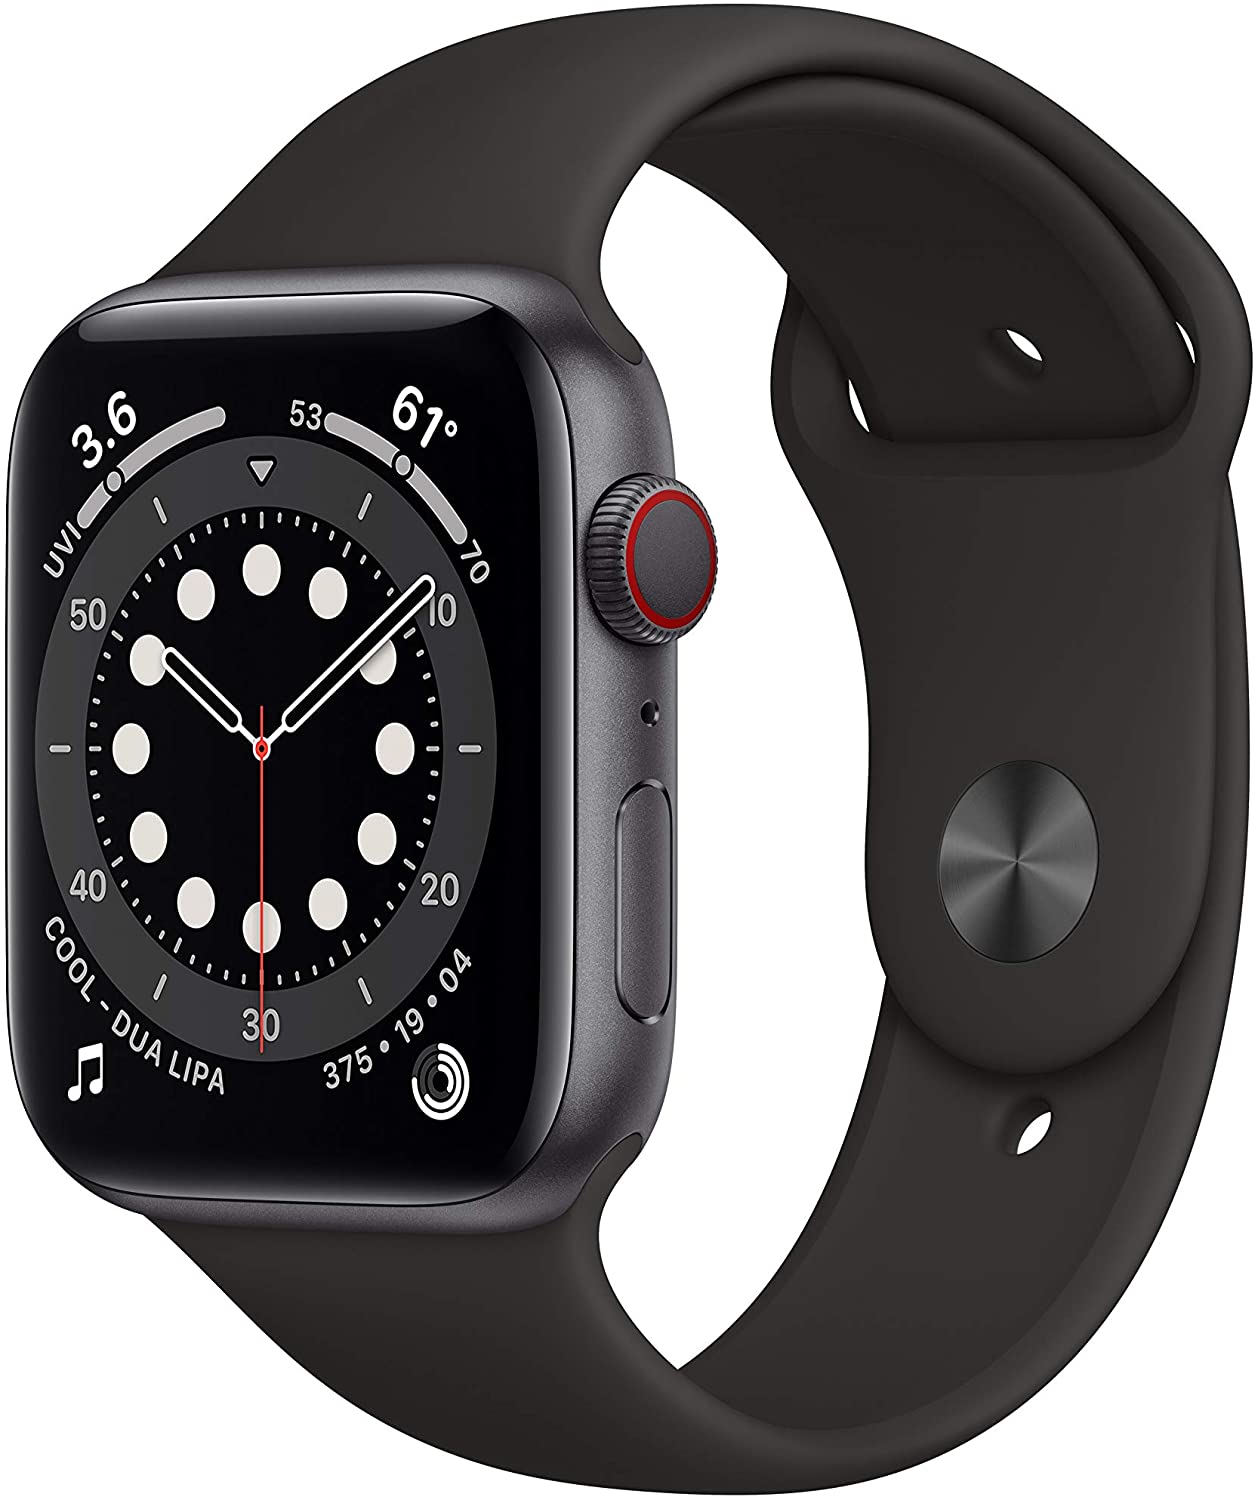 Apple Watch Series 6 GPS + LTE w/ 44MM Space Gray Aluminum Case Black Sport Band (Certified Refurbished)